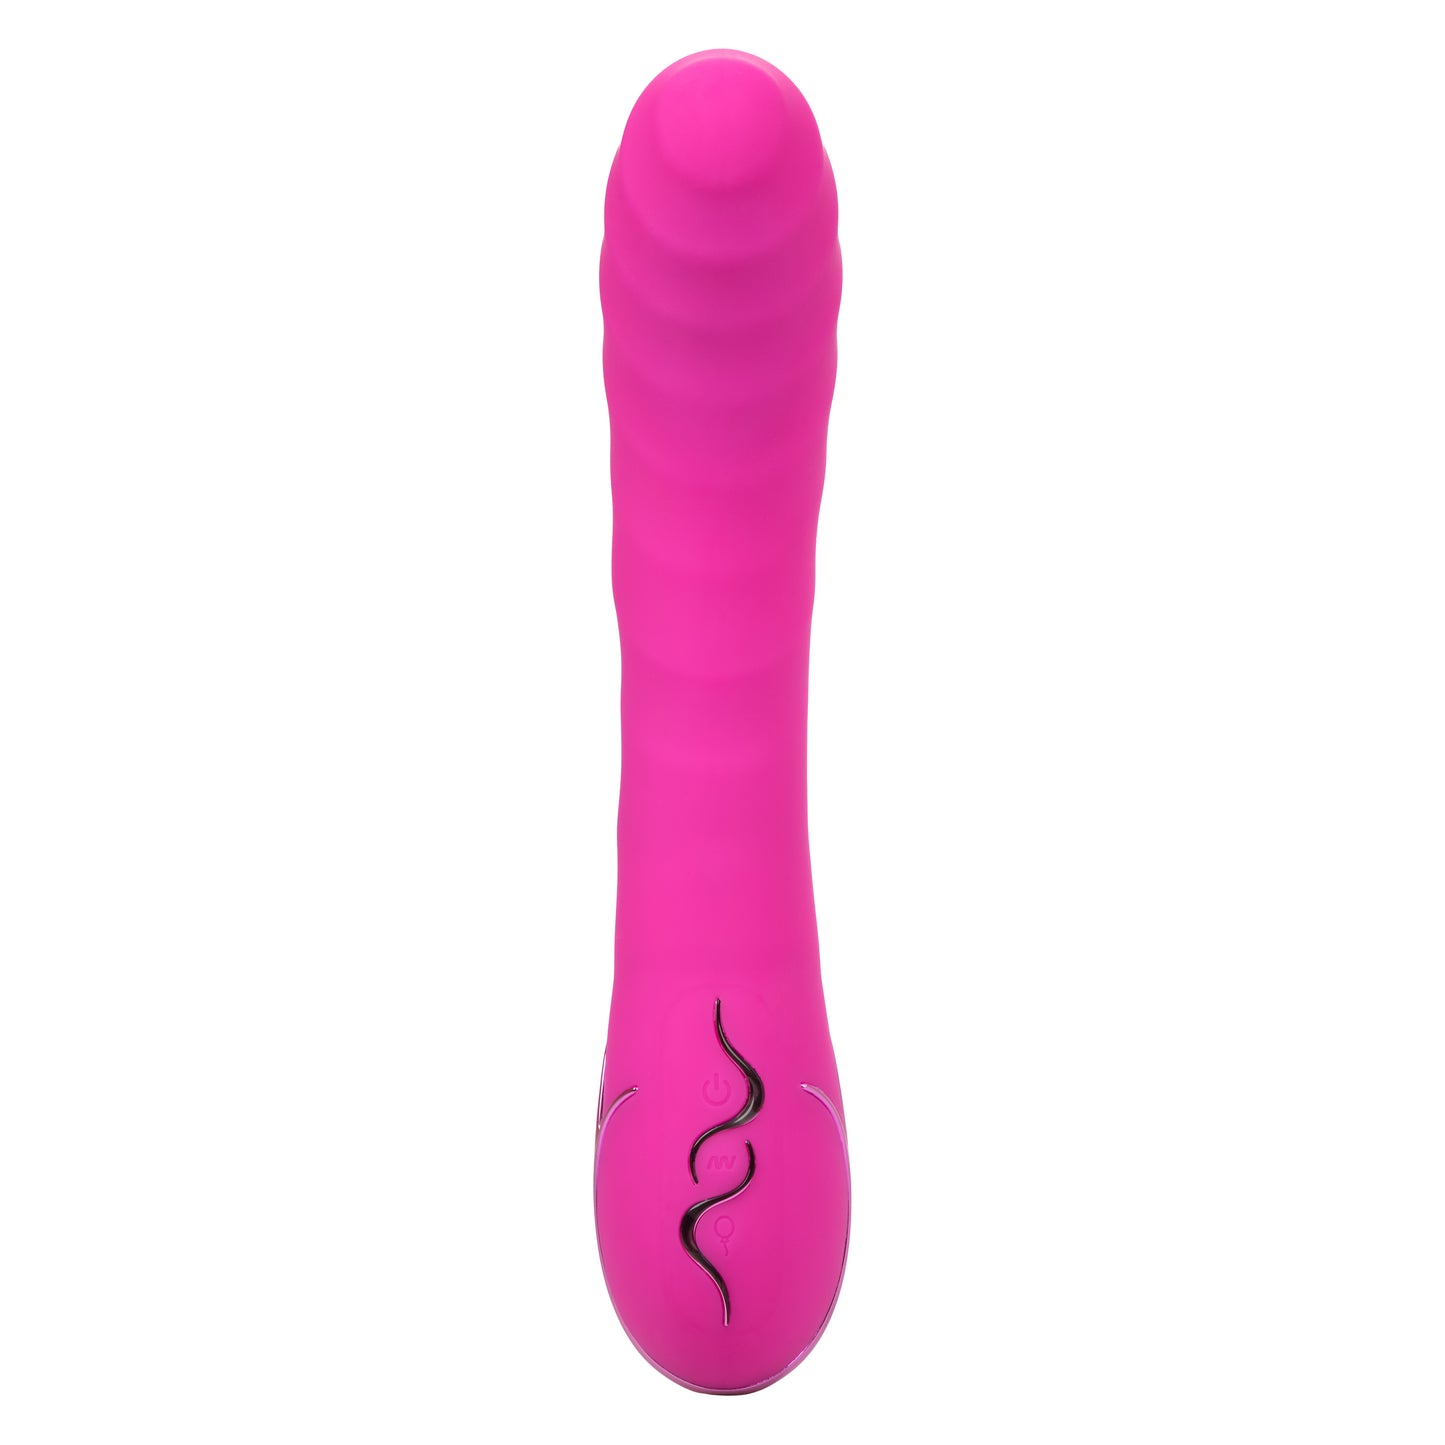 Insatiable G™ Inflatable G-Wand